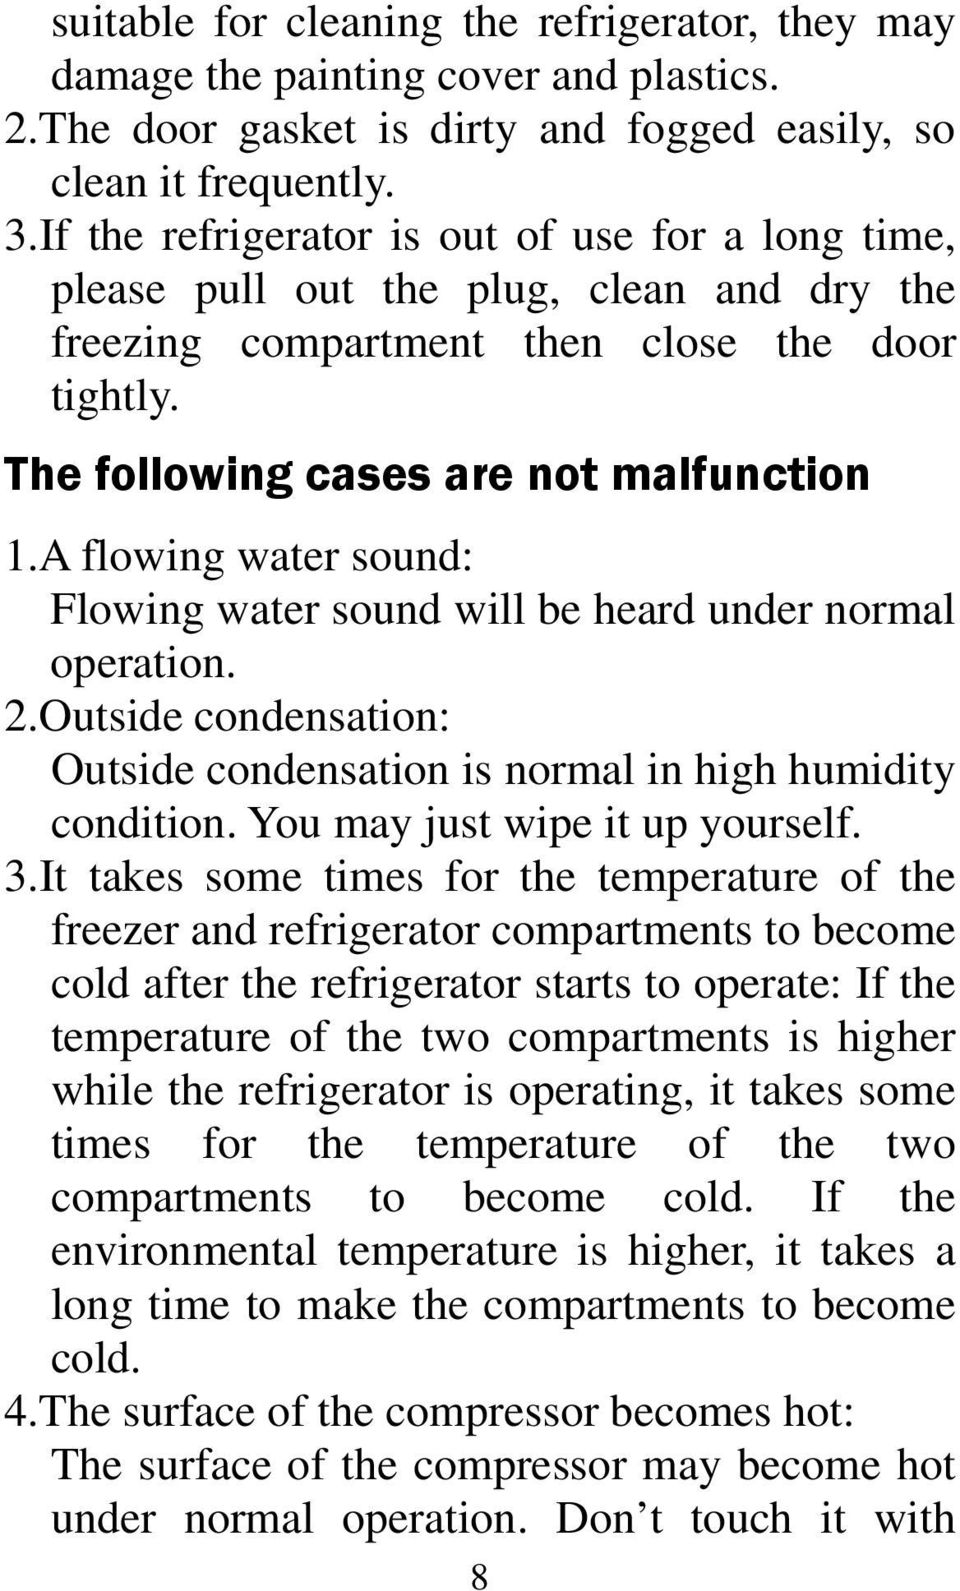 A flowing water sound: Flowing water sound will be heard under normal operation. 2.Outside condensation: Outside condensation is normal in high humidity condition. You may just wipe it up yourself. 3.